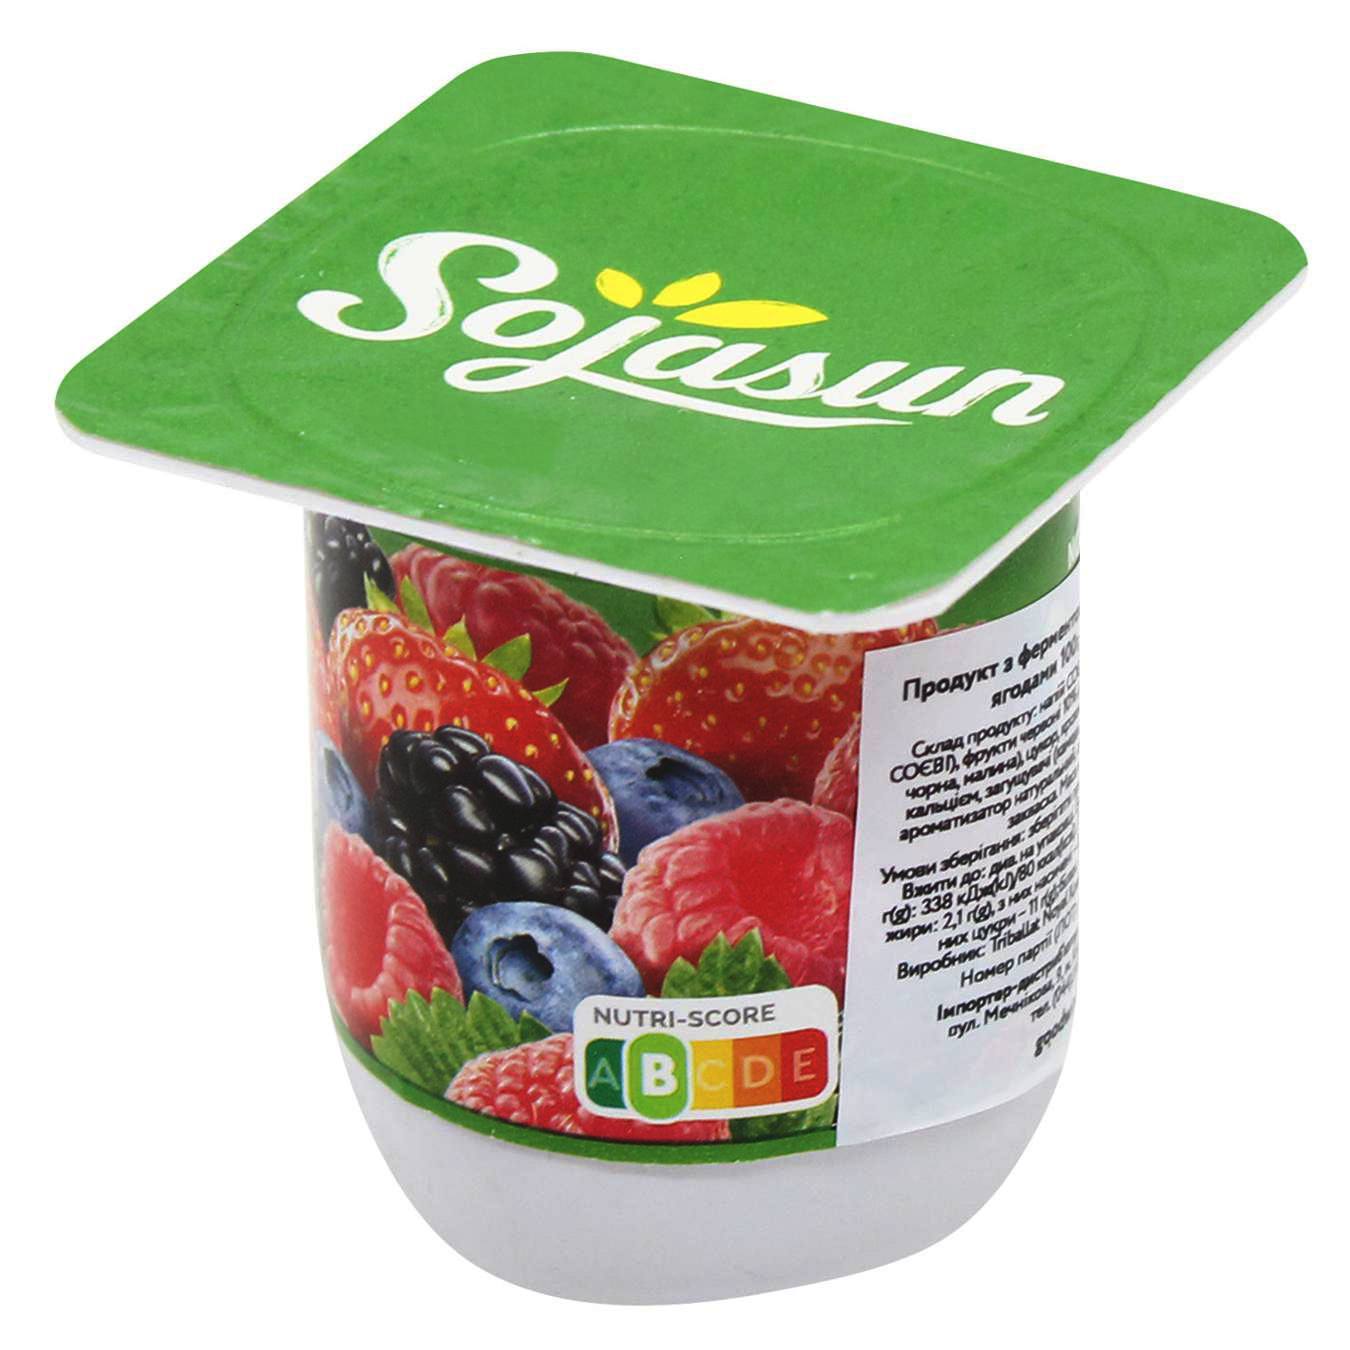 Sojasun soy yogurt with pieces of red fruit 1pc 100g